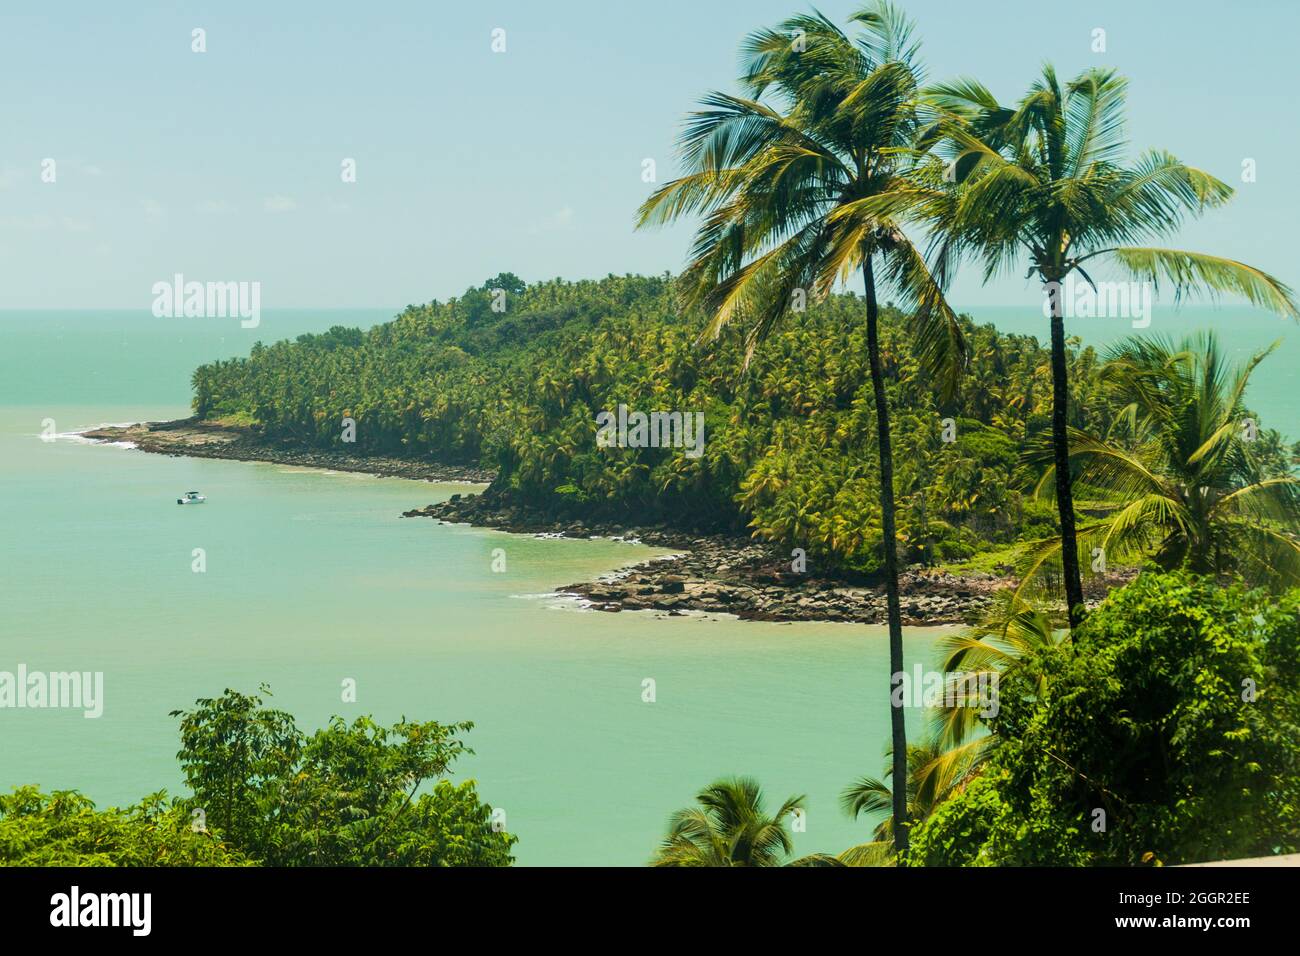 View of Ile du Diable (Devil's Island) from Ile Royale in archipelago of Iles du Salut (Islands of Salvation) in French Guiana Stock Photo